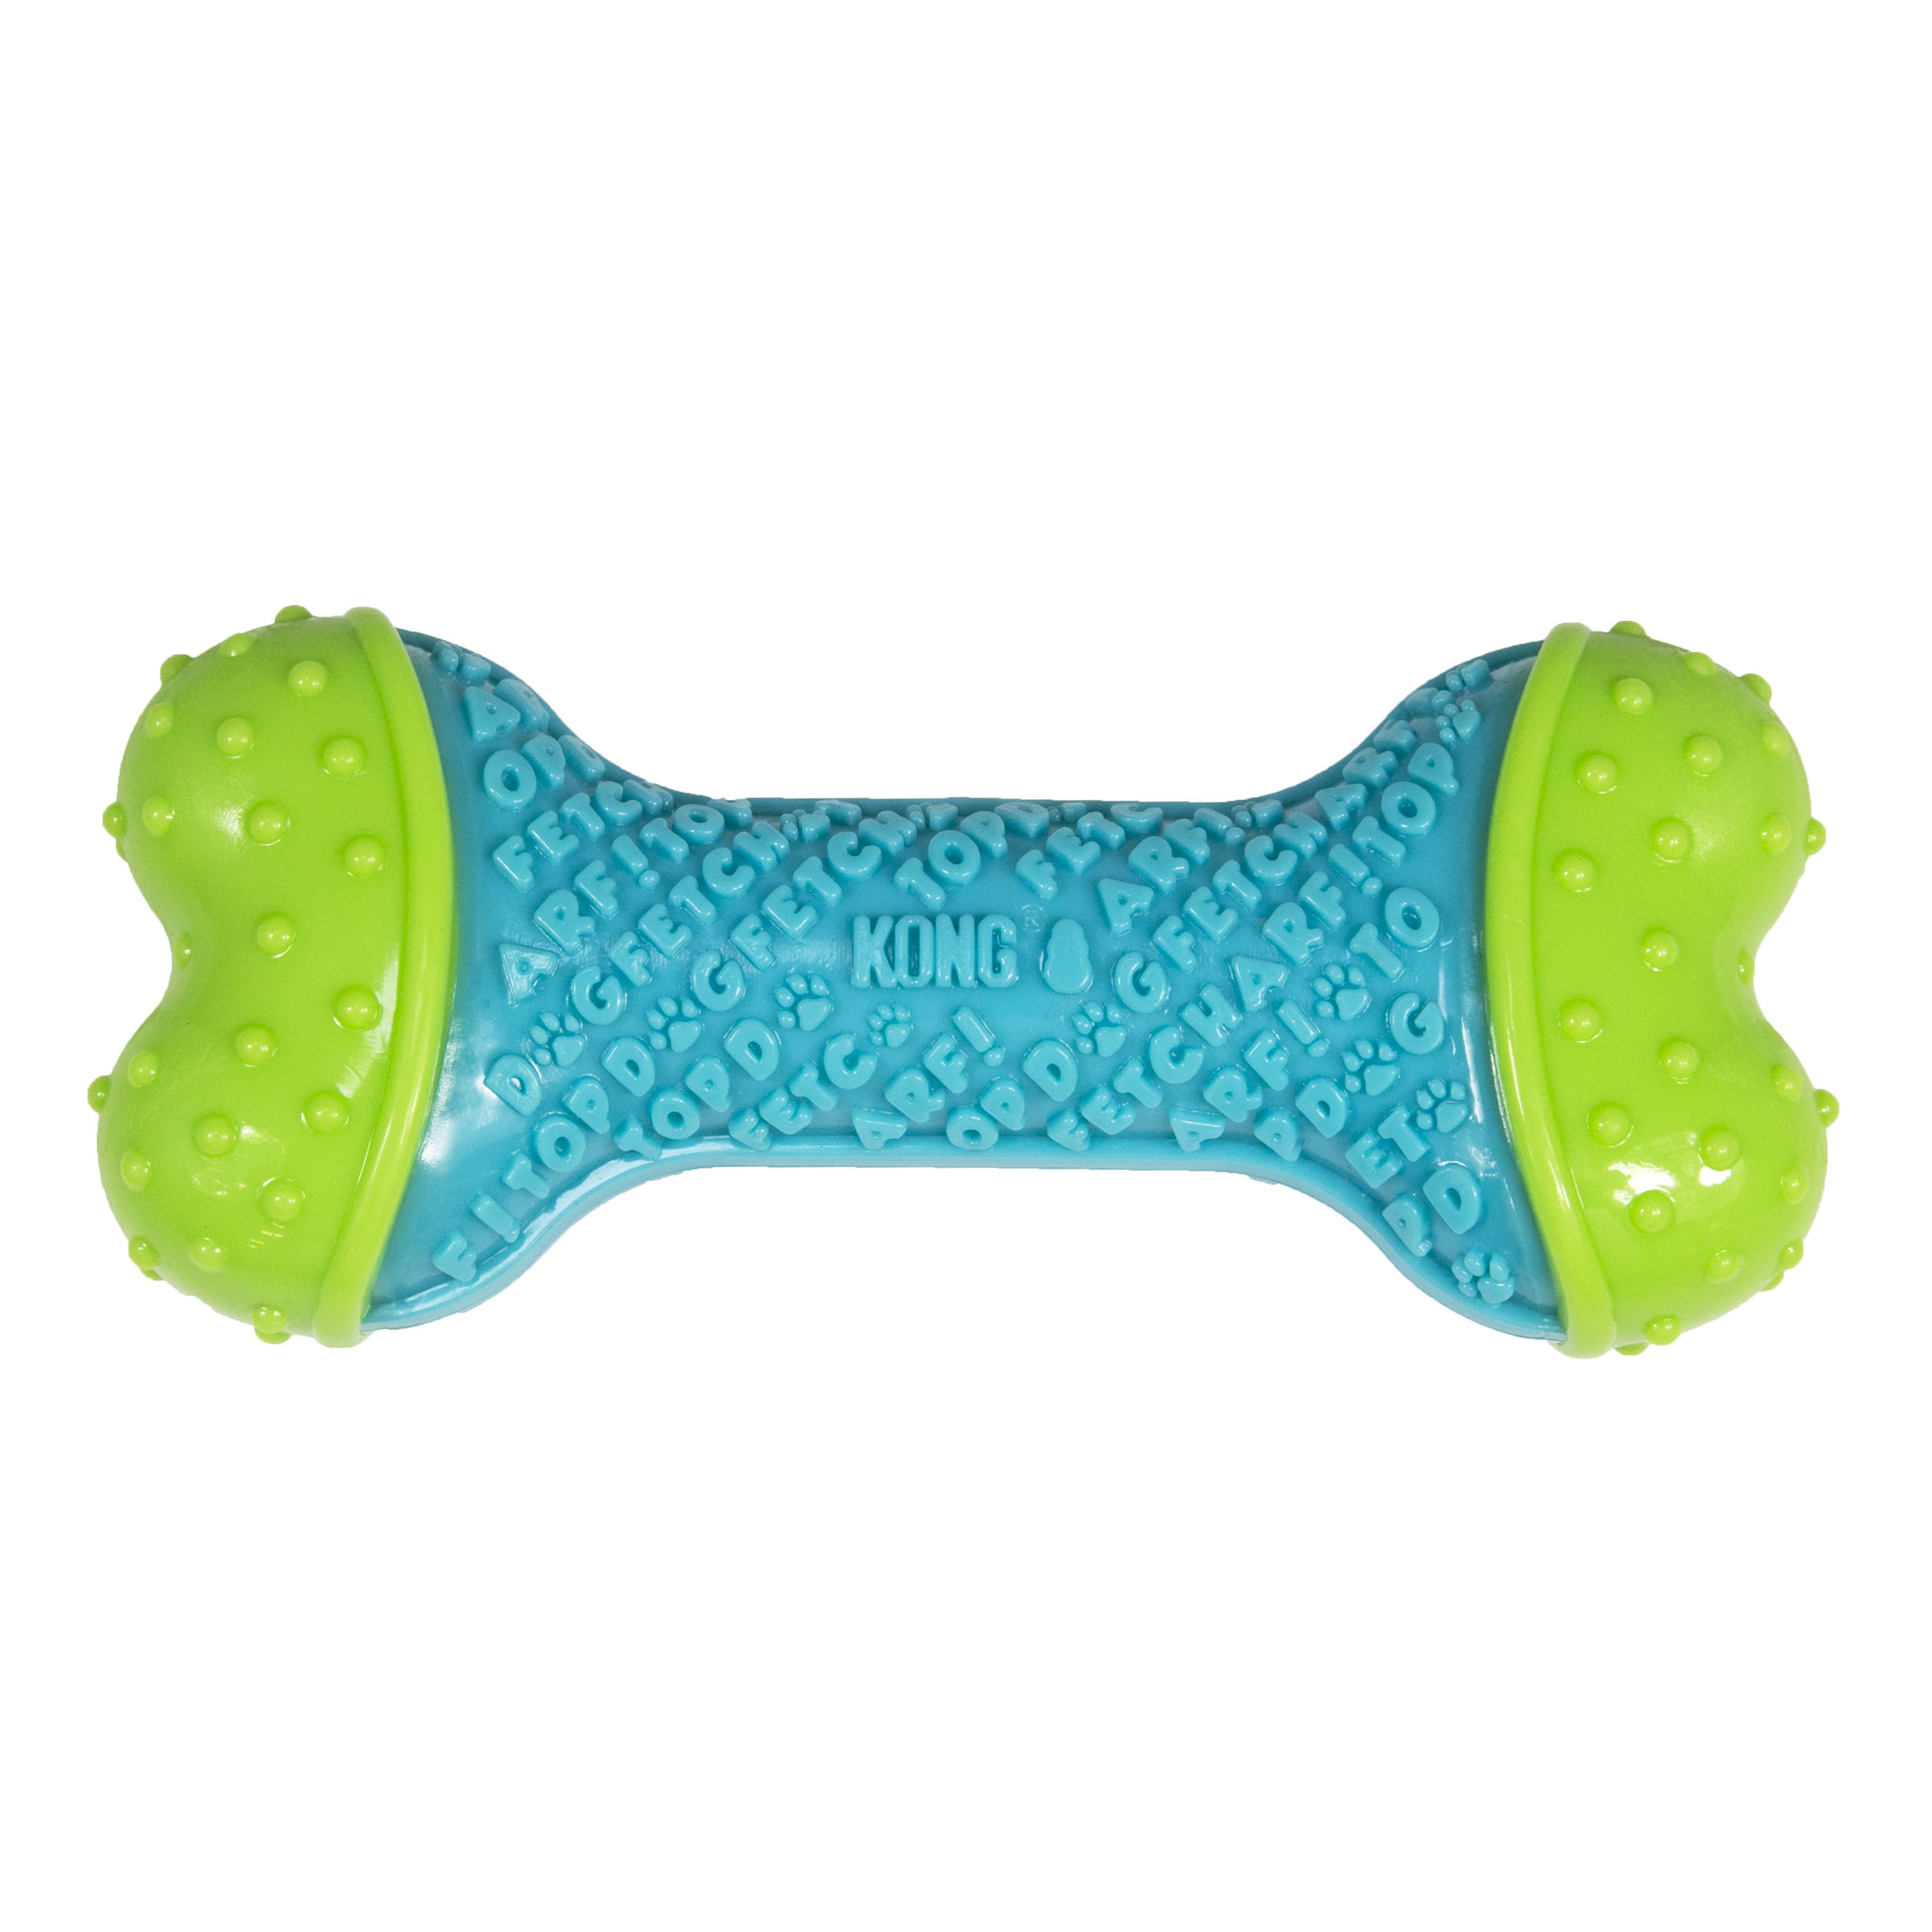 CoreStrength Bone offpack product image